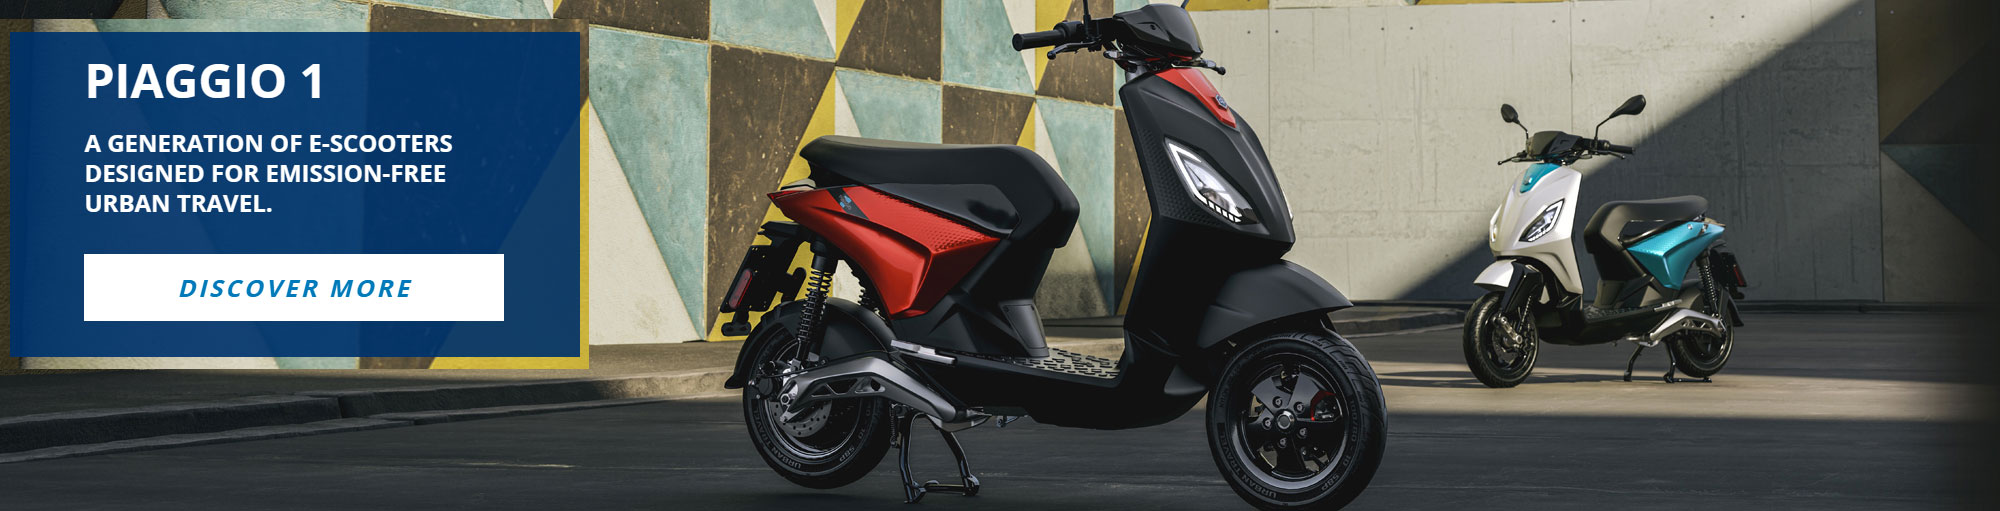 PIAGGIO 1 A GENERATION OF E-SCOOTERS DESIGNED FOR EMISSION-FREE URBAN TRAVEL.